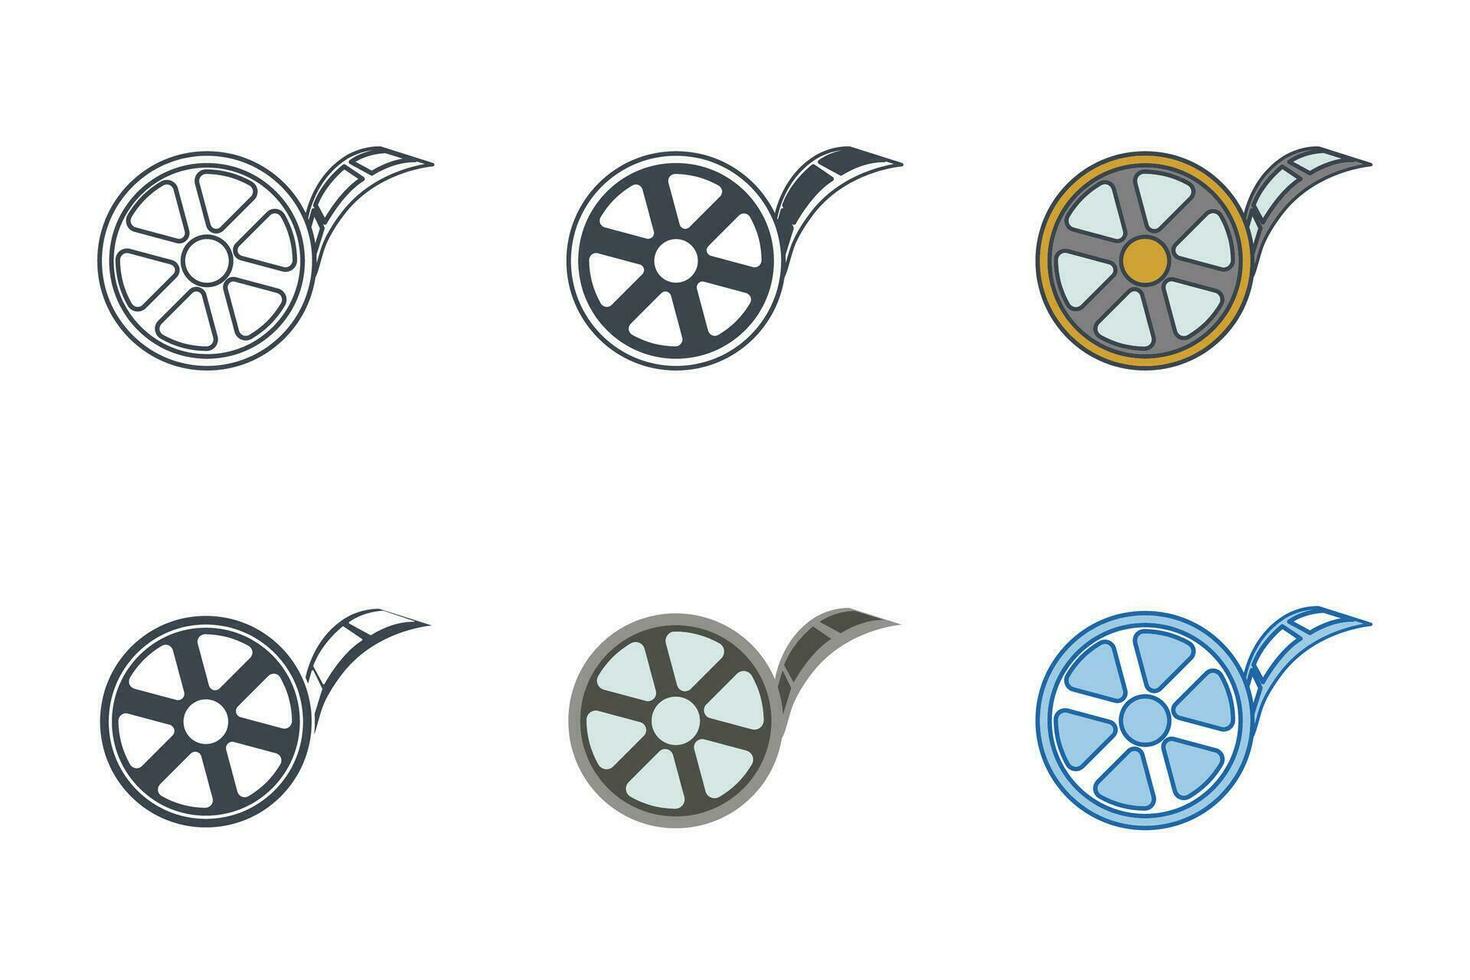 Film Reel icon collection with different styles. Reel Film icon symbol vector illustration isolated on white background